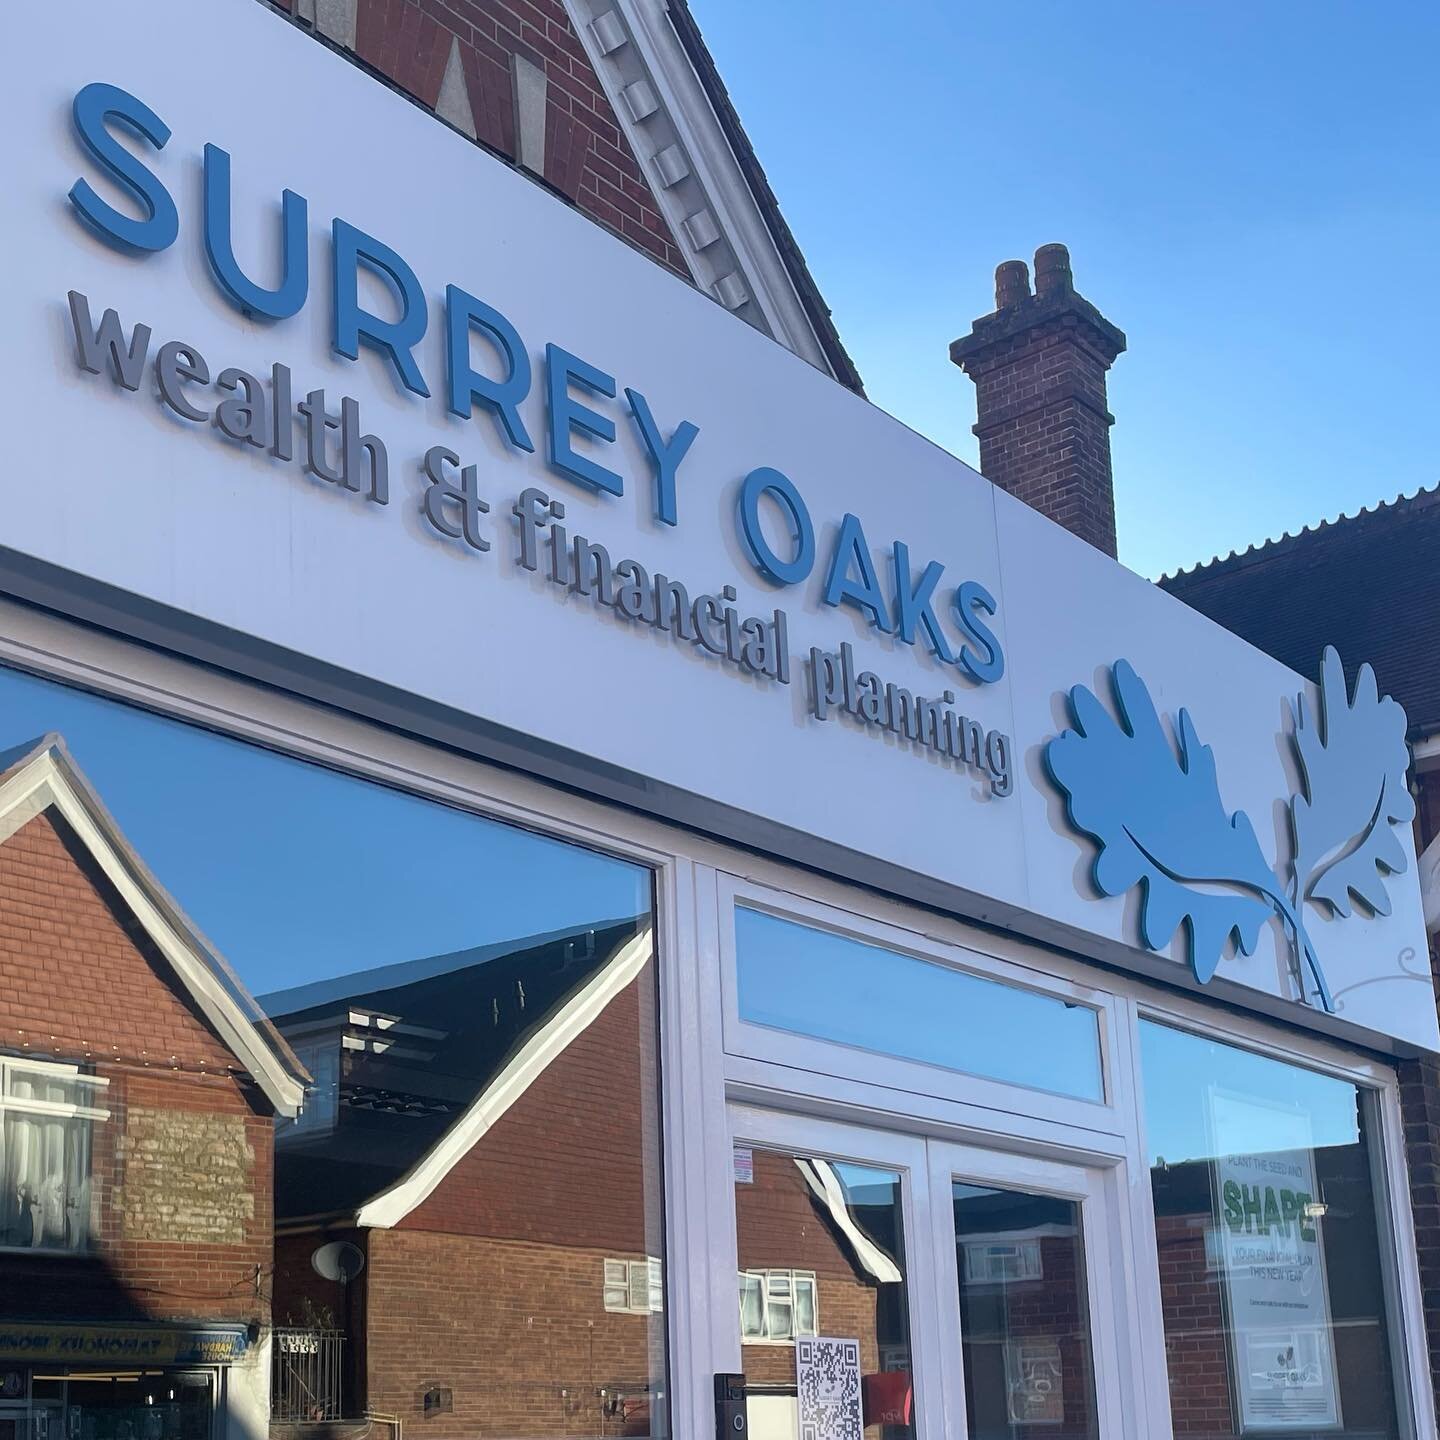 Finally got to visit Surrey Oaks Wealth Management today to take a look at their new signage in situ! Exterior signage included this main sign with graphics on stand out locators and frosted window vinyl. Also an LED advertising frame which looks fan